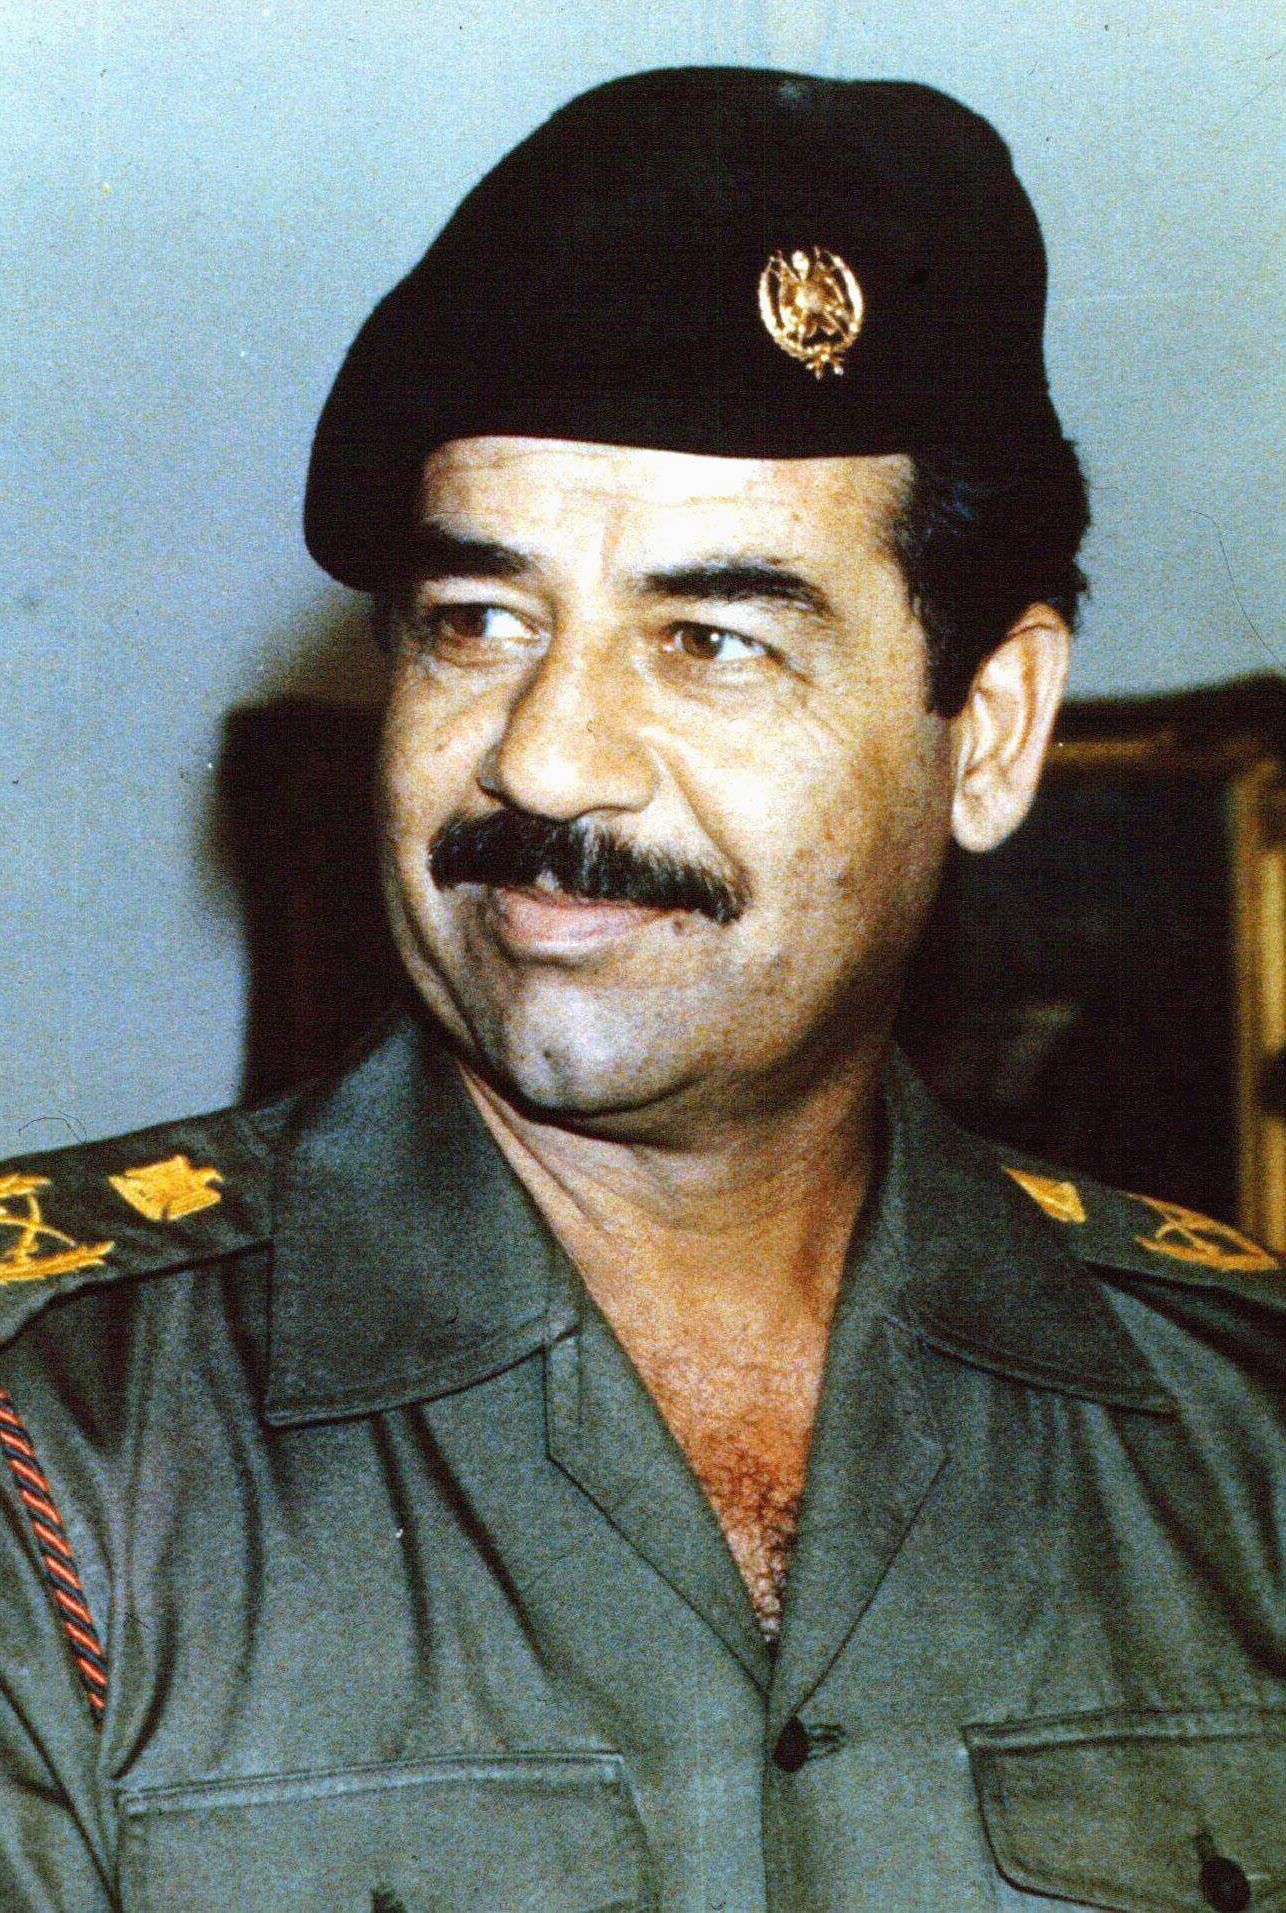 Saddam Hussein's daughter, Raghad, selling jewelry inspired by the 'Butcher  of Baghdad' - Washington Times